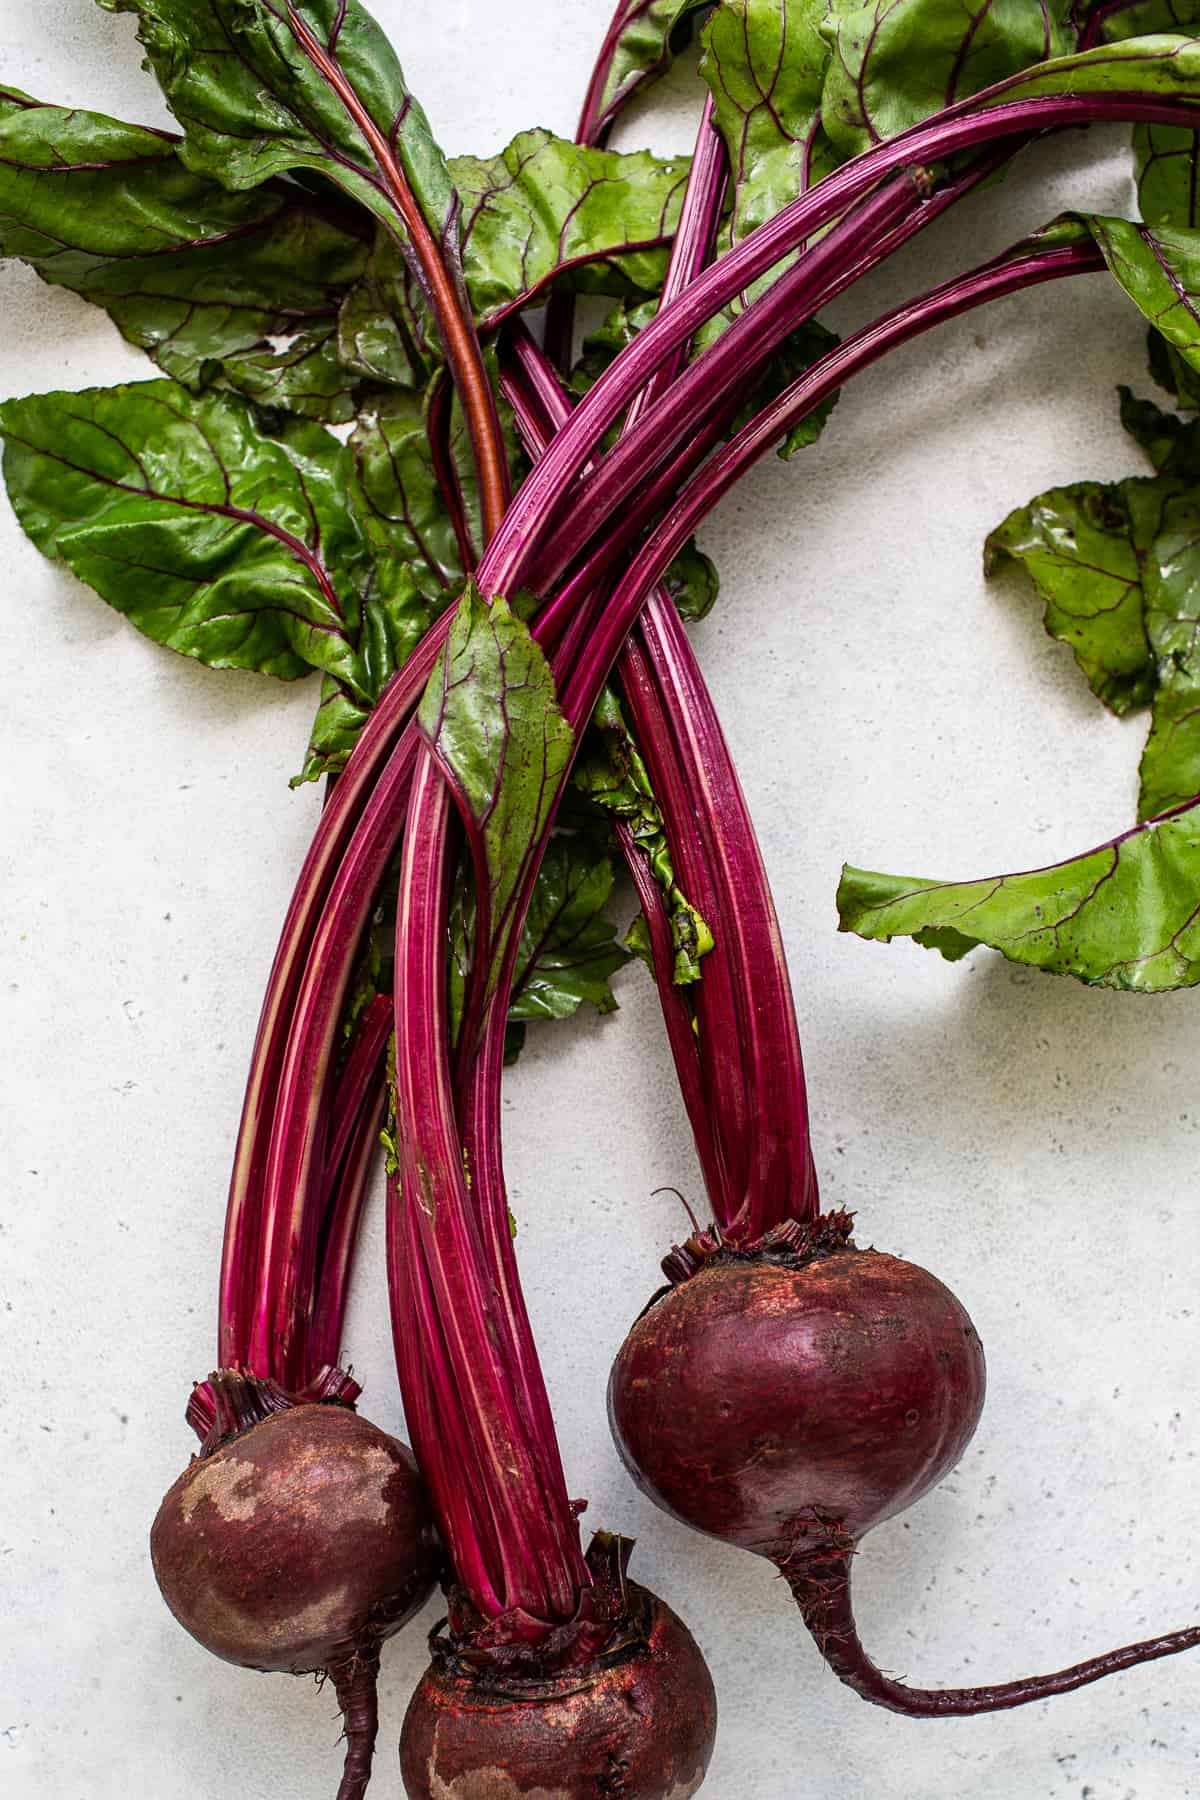 Whole beets on the stem.